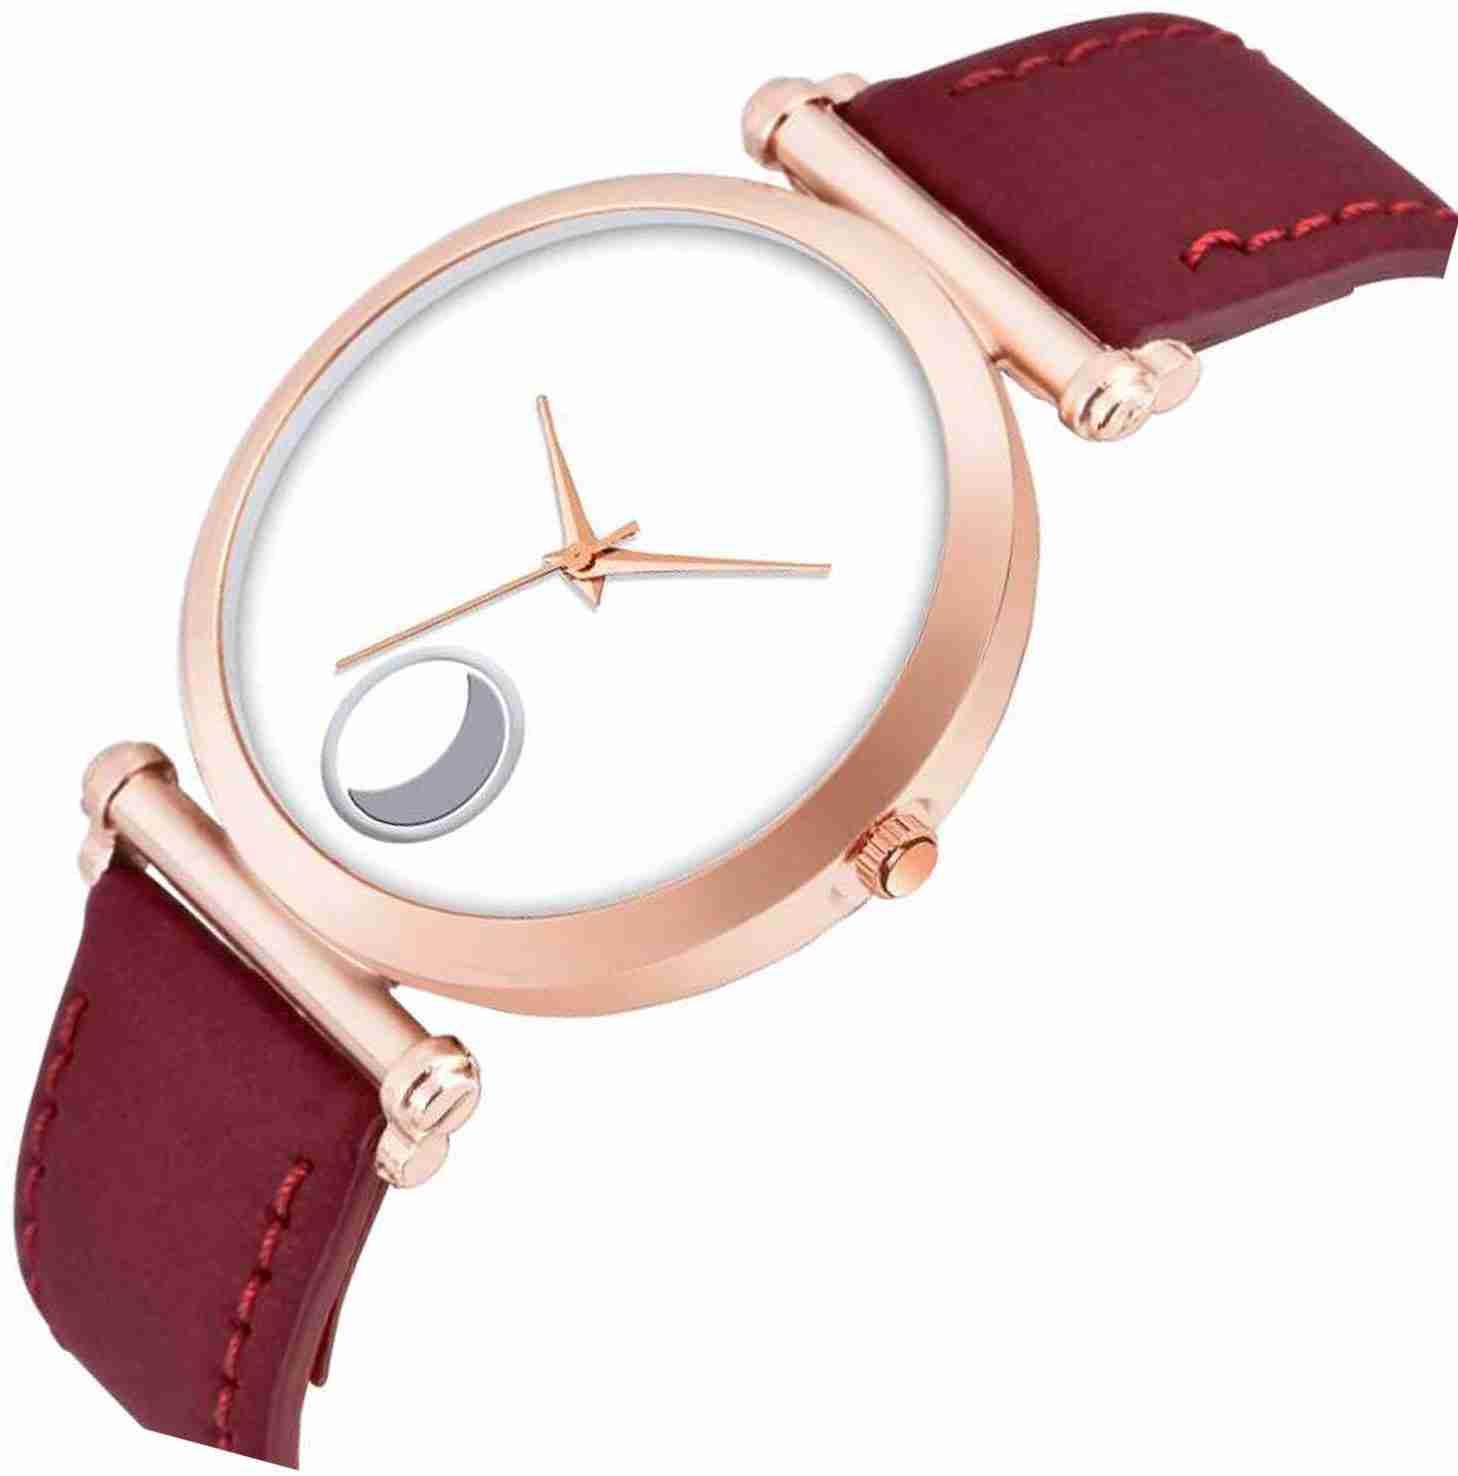 Genuine Leather Analog Quartz Sports Watch Water Resistant Maroon Colour